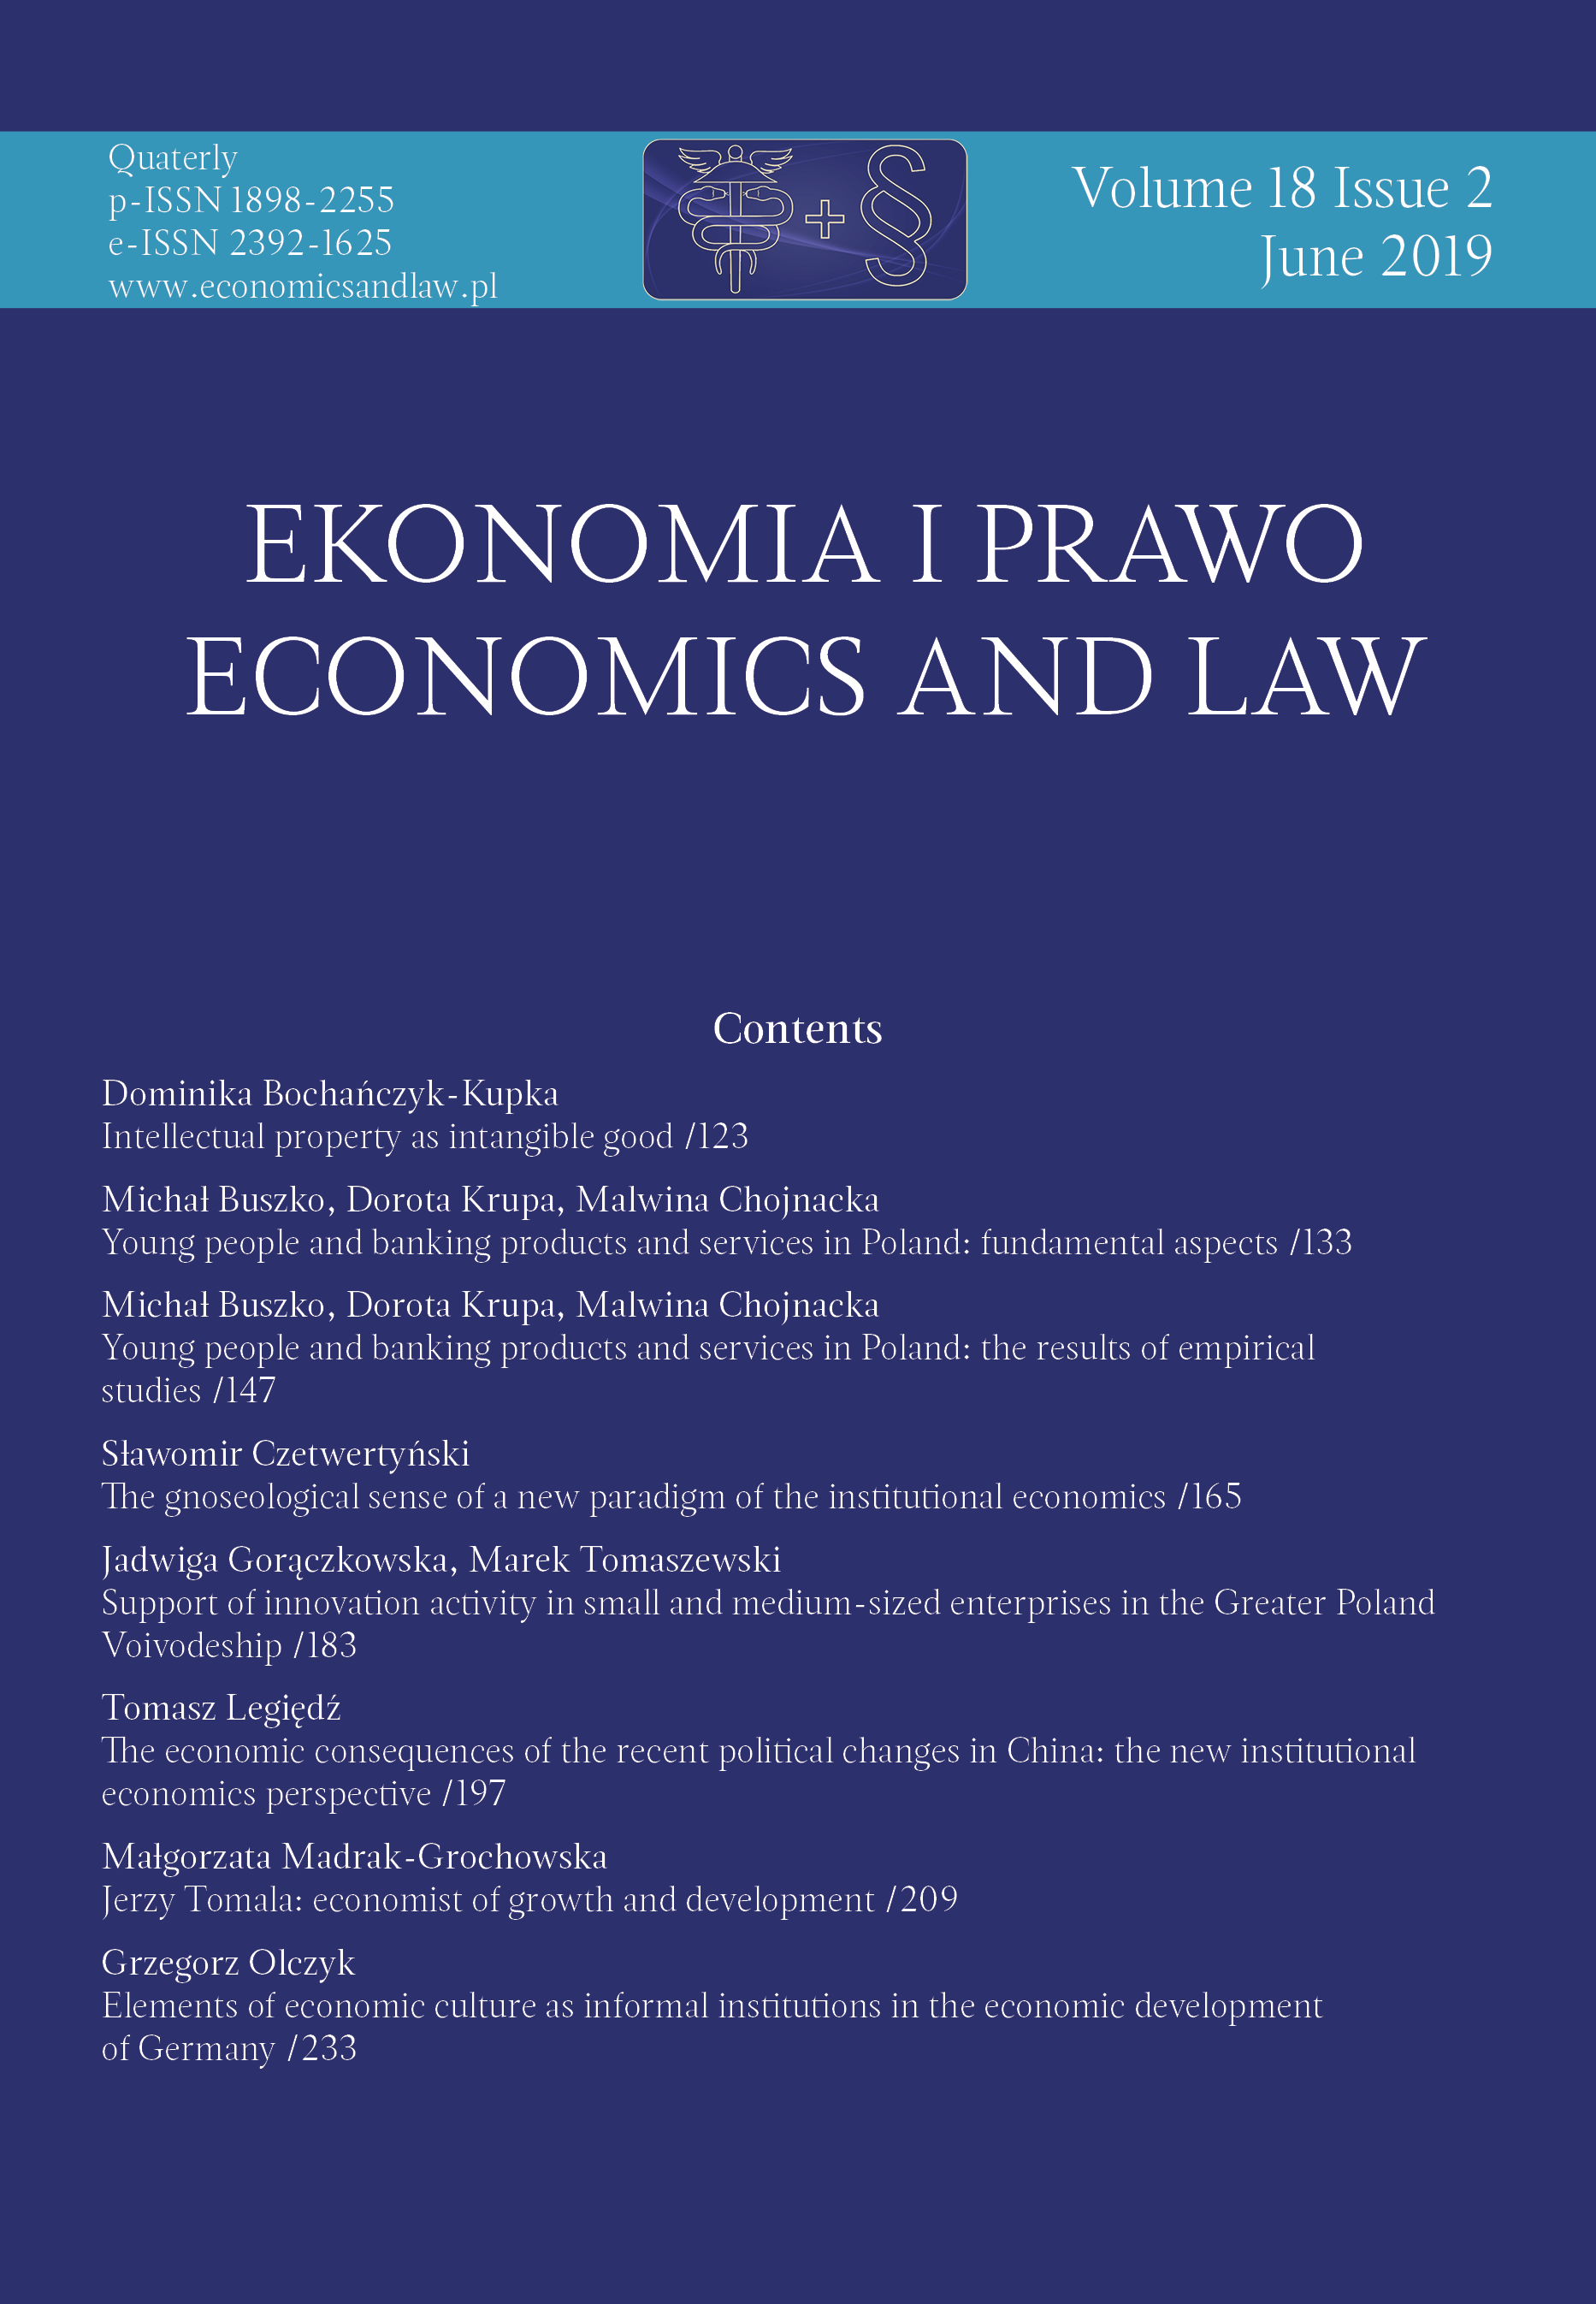 Young people and banking products and services in Poland: fundamental aspects